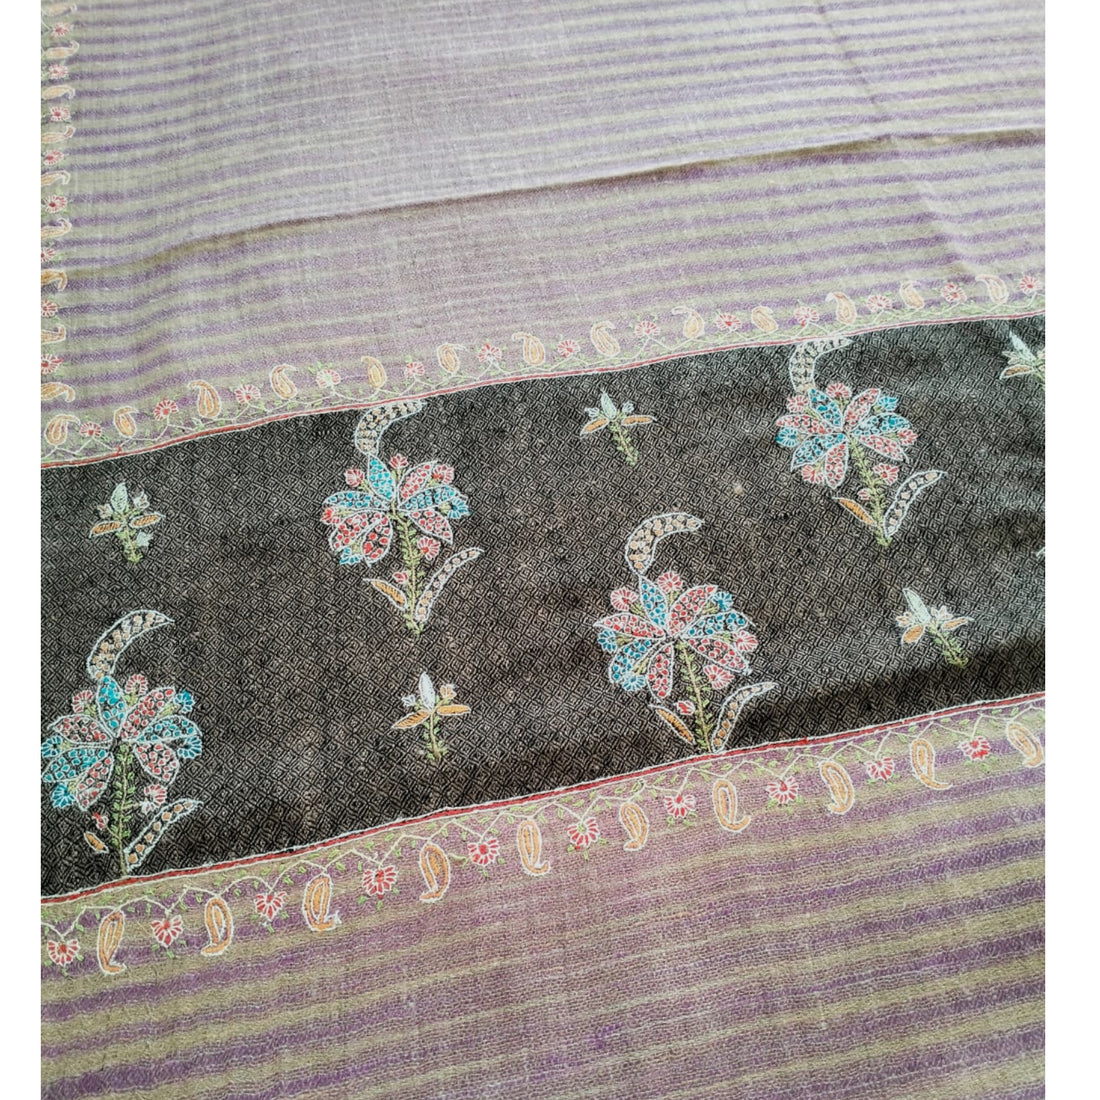 Handwoven Ikat Pashmina with Embroidery